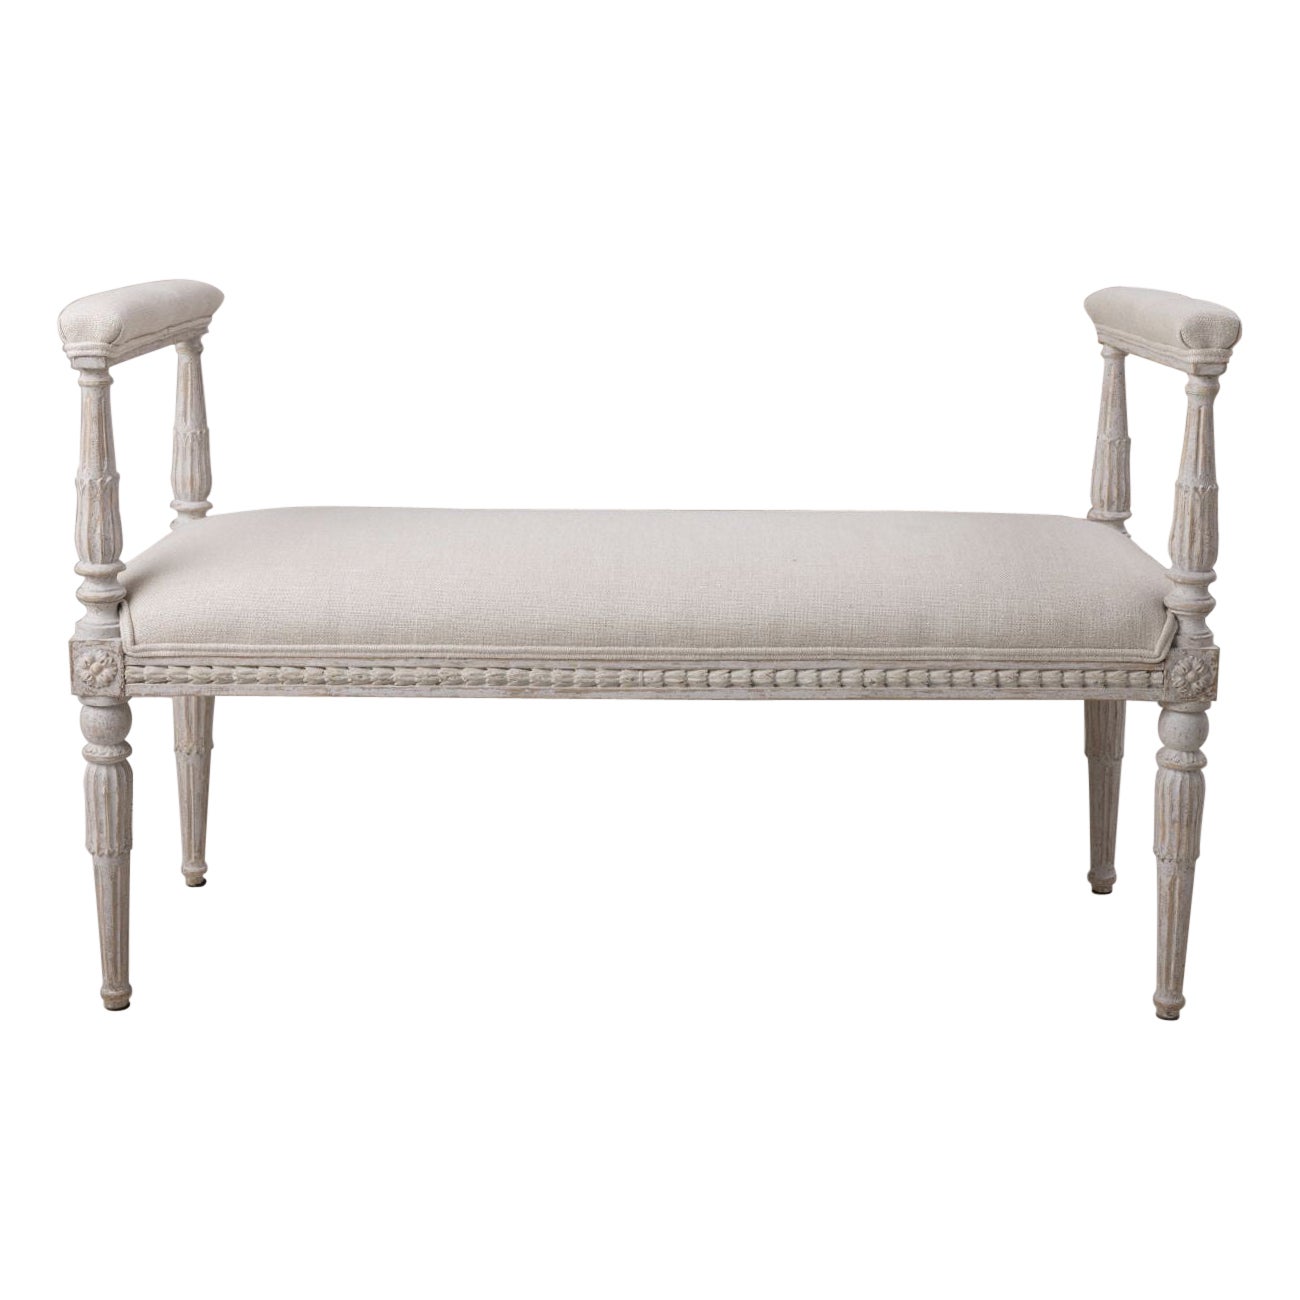 19th C. Swedish Gustavian Painted Window Seat Bench with Armrests